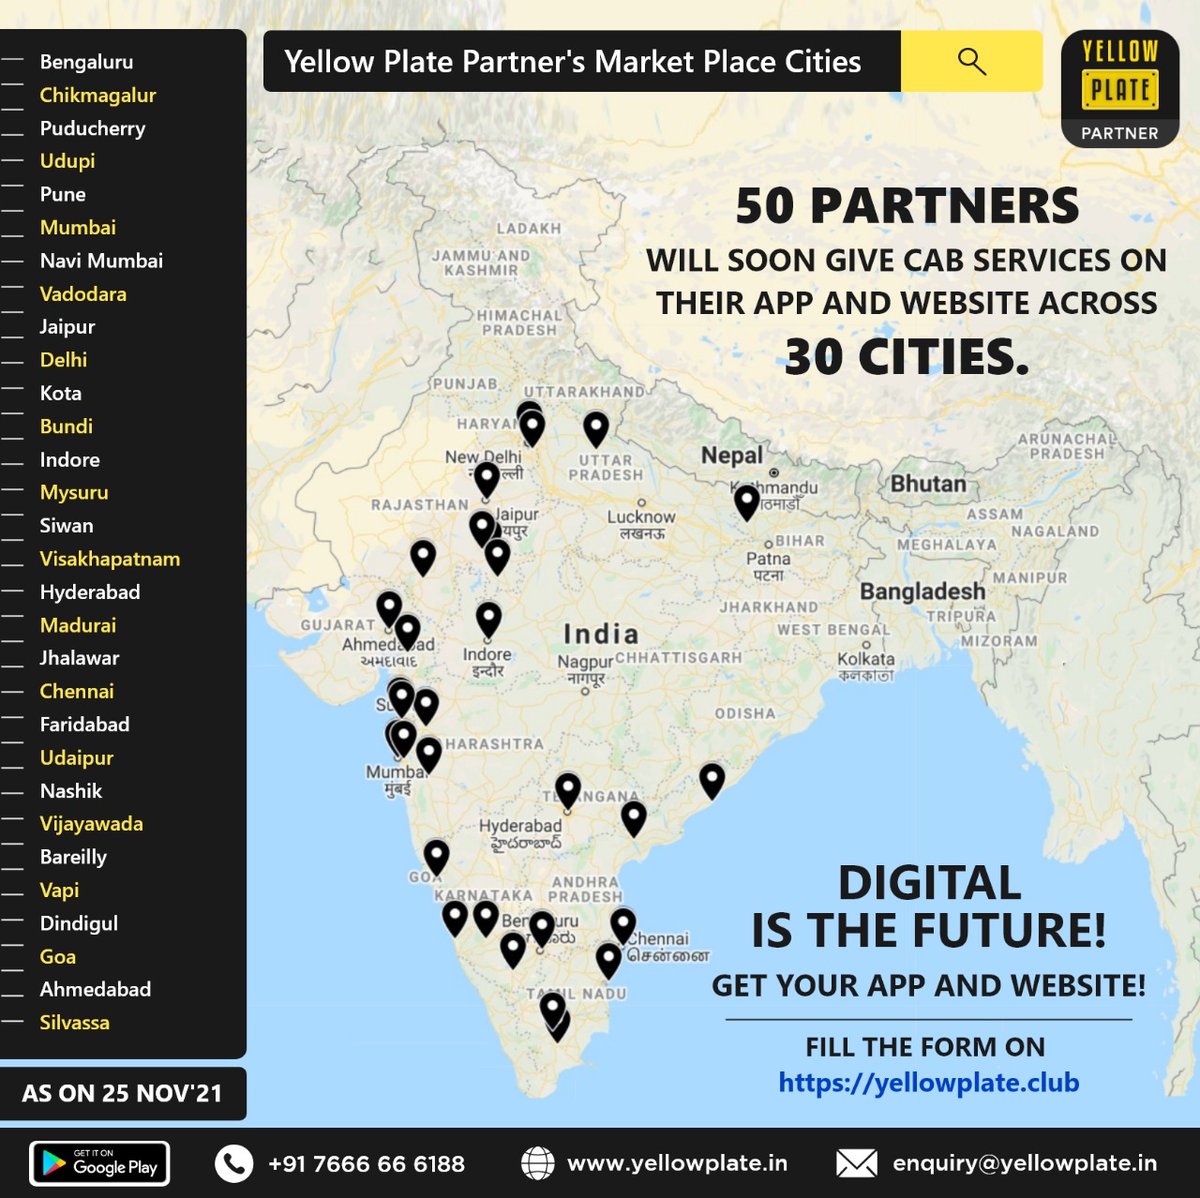 On a mission to digitize the #Travel & #Transport segment in India.

#YellowPlate #DigitalIndia #vocalforlocal #technology #marketplace #carrentals #taxiservice #carsonrent #touroperator #travelagent #travelagency #startup #entrepreneur #tourism #india #tech #startups #tour